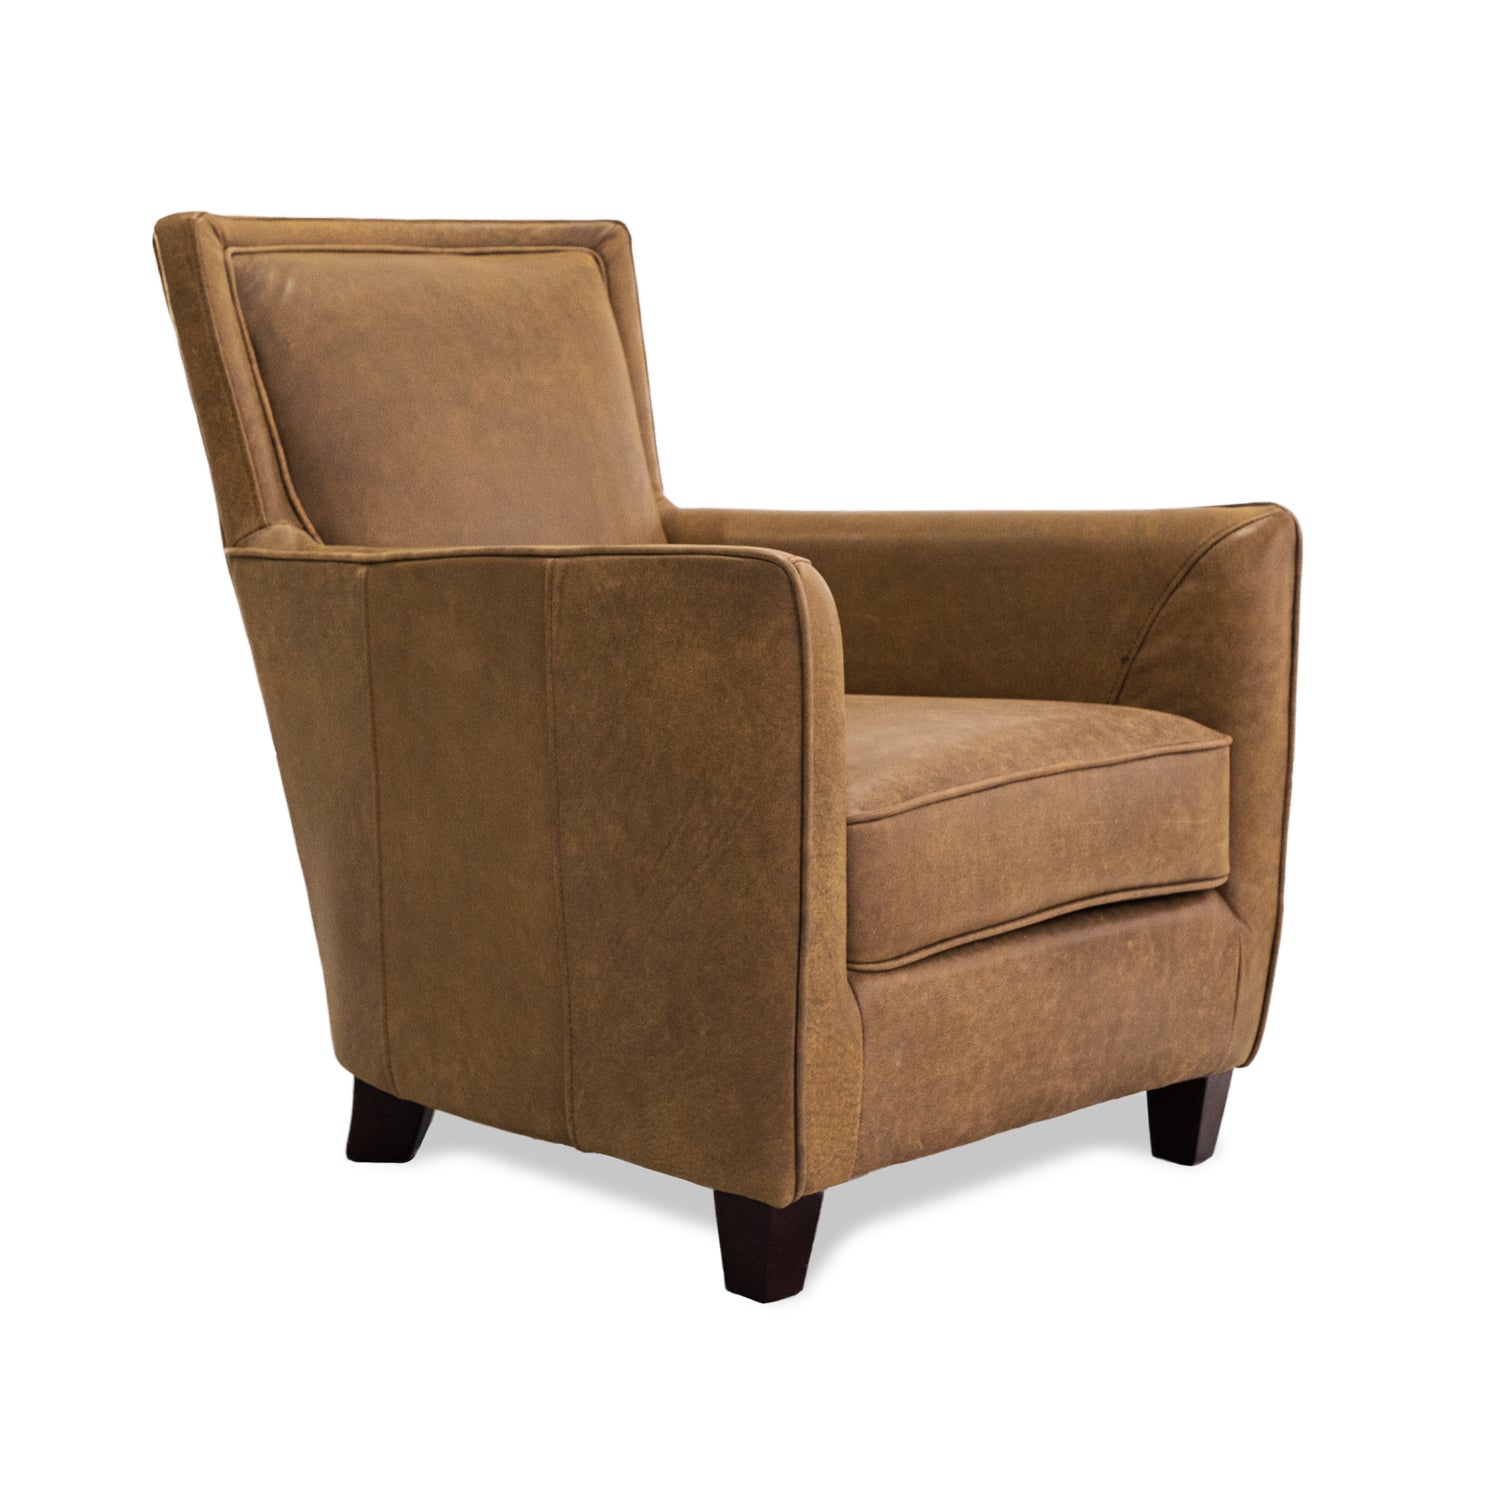 Monteray Leather Chair